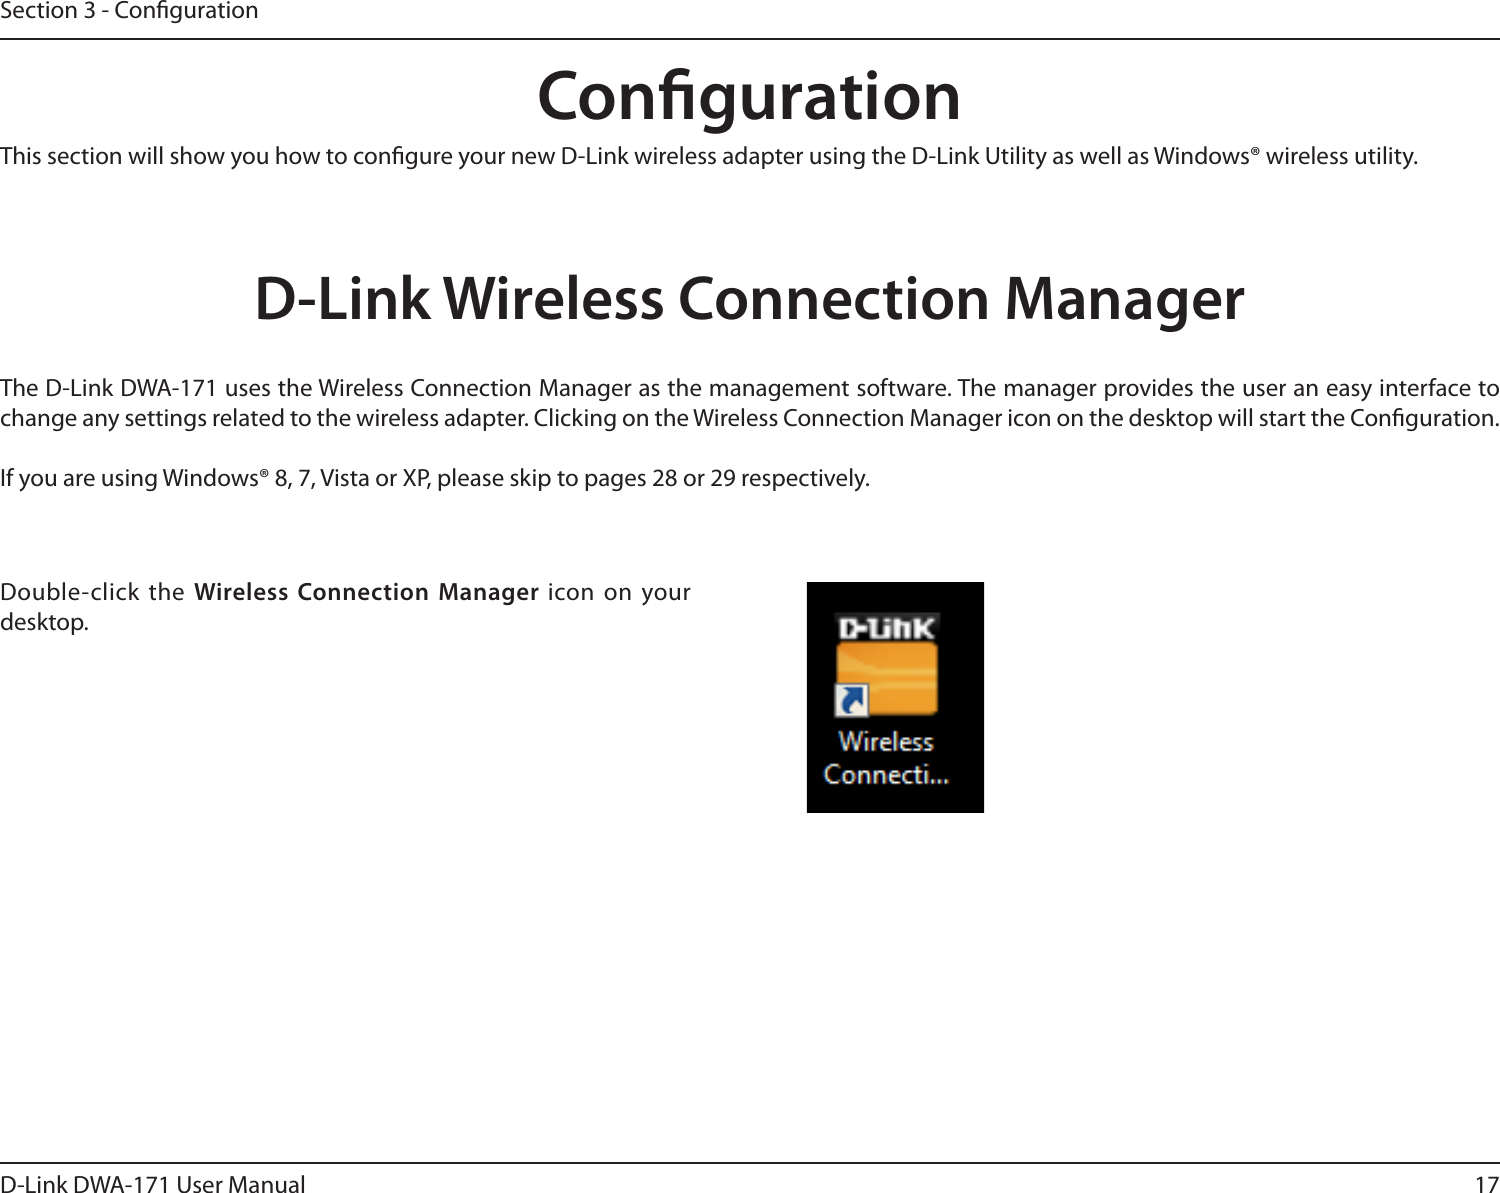 17D-Link DWA-171 User ManualSection 3 - CongurationCongurationThis section will show you how to congure your new D-Link wireless adapter using the D-Link Utility as well as Windows® wireless utility.D-Link Wireless Connection ManagerThe D-Link DWA-171 uses the Wireless Connection Manager as the management software. The manager provides the user an easy interface to change any settings related to the wireless adapter. Clicking on the Wireless Connection Manager icon on the desktop will start the Conguration.If you are using Windows® 8, 7, Vista or XP, please skip to pages 28 or 29 respectively.Double-click the Wireless Connection Manager icon on your desktop.